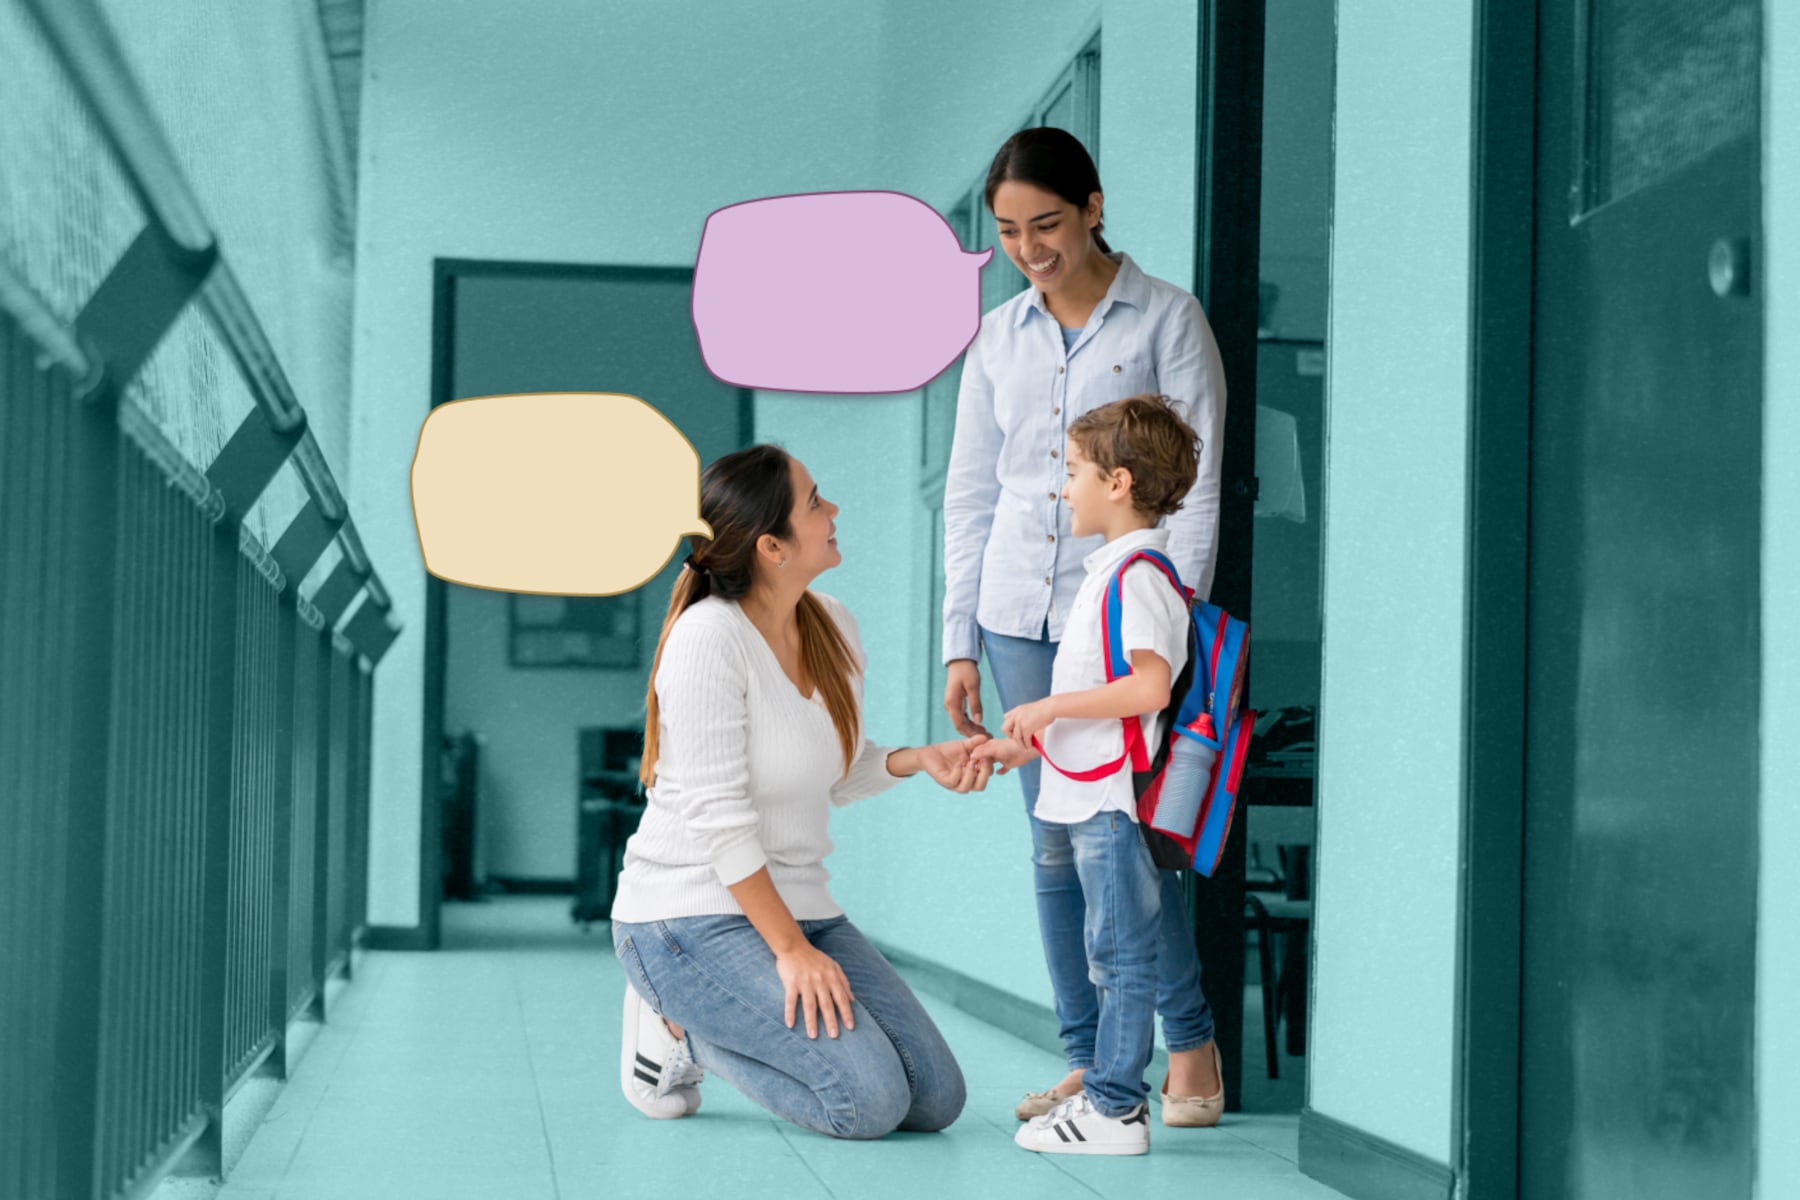 A mother picking up her child from school and talking to the teacher. A yellow speech bubble floating next to the mother, a purple speech bubble next to the teacher.